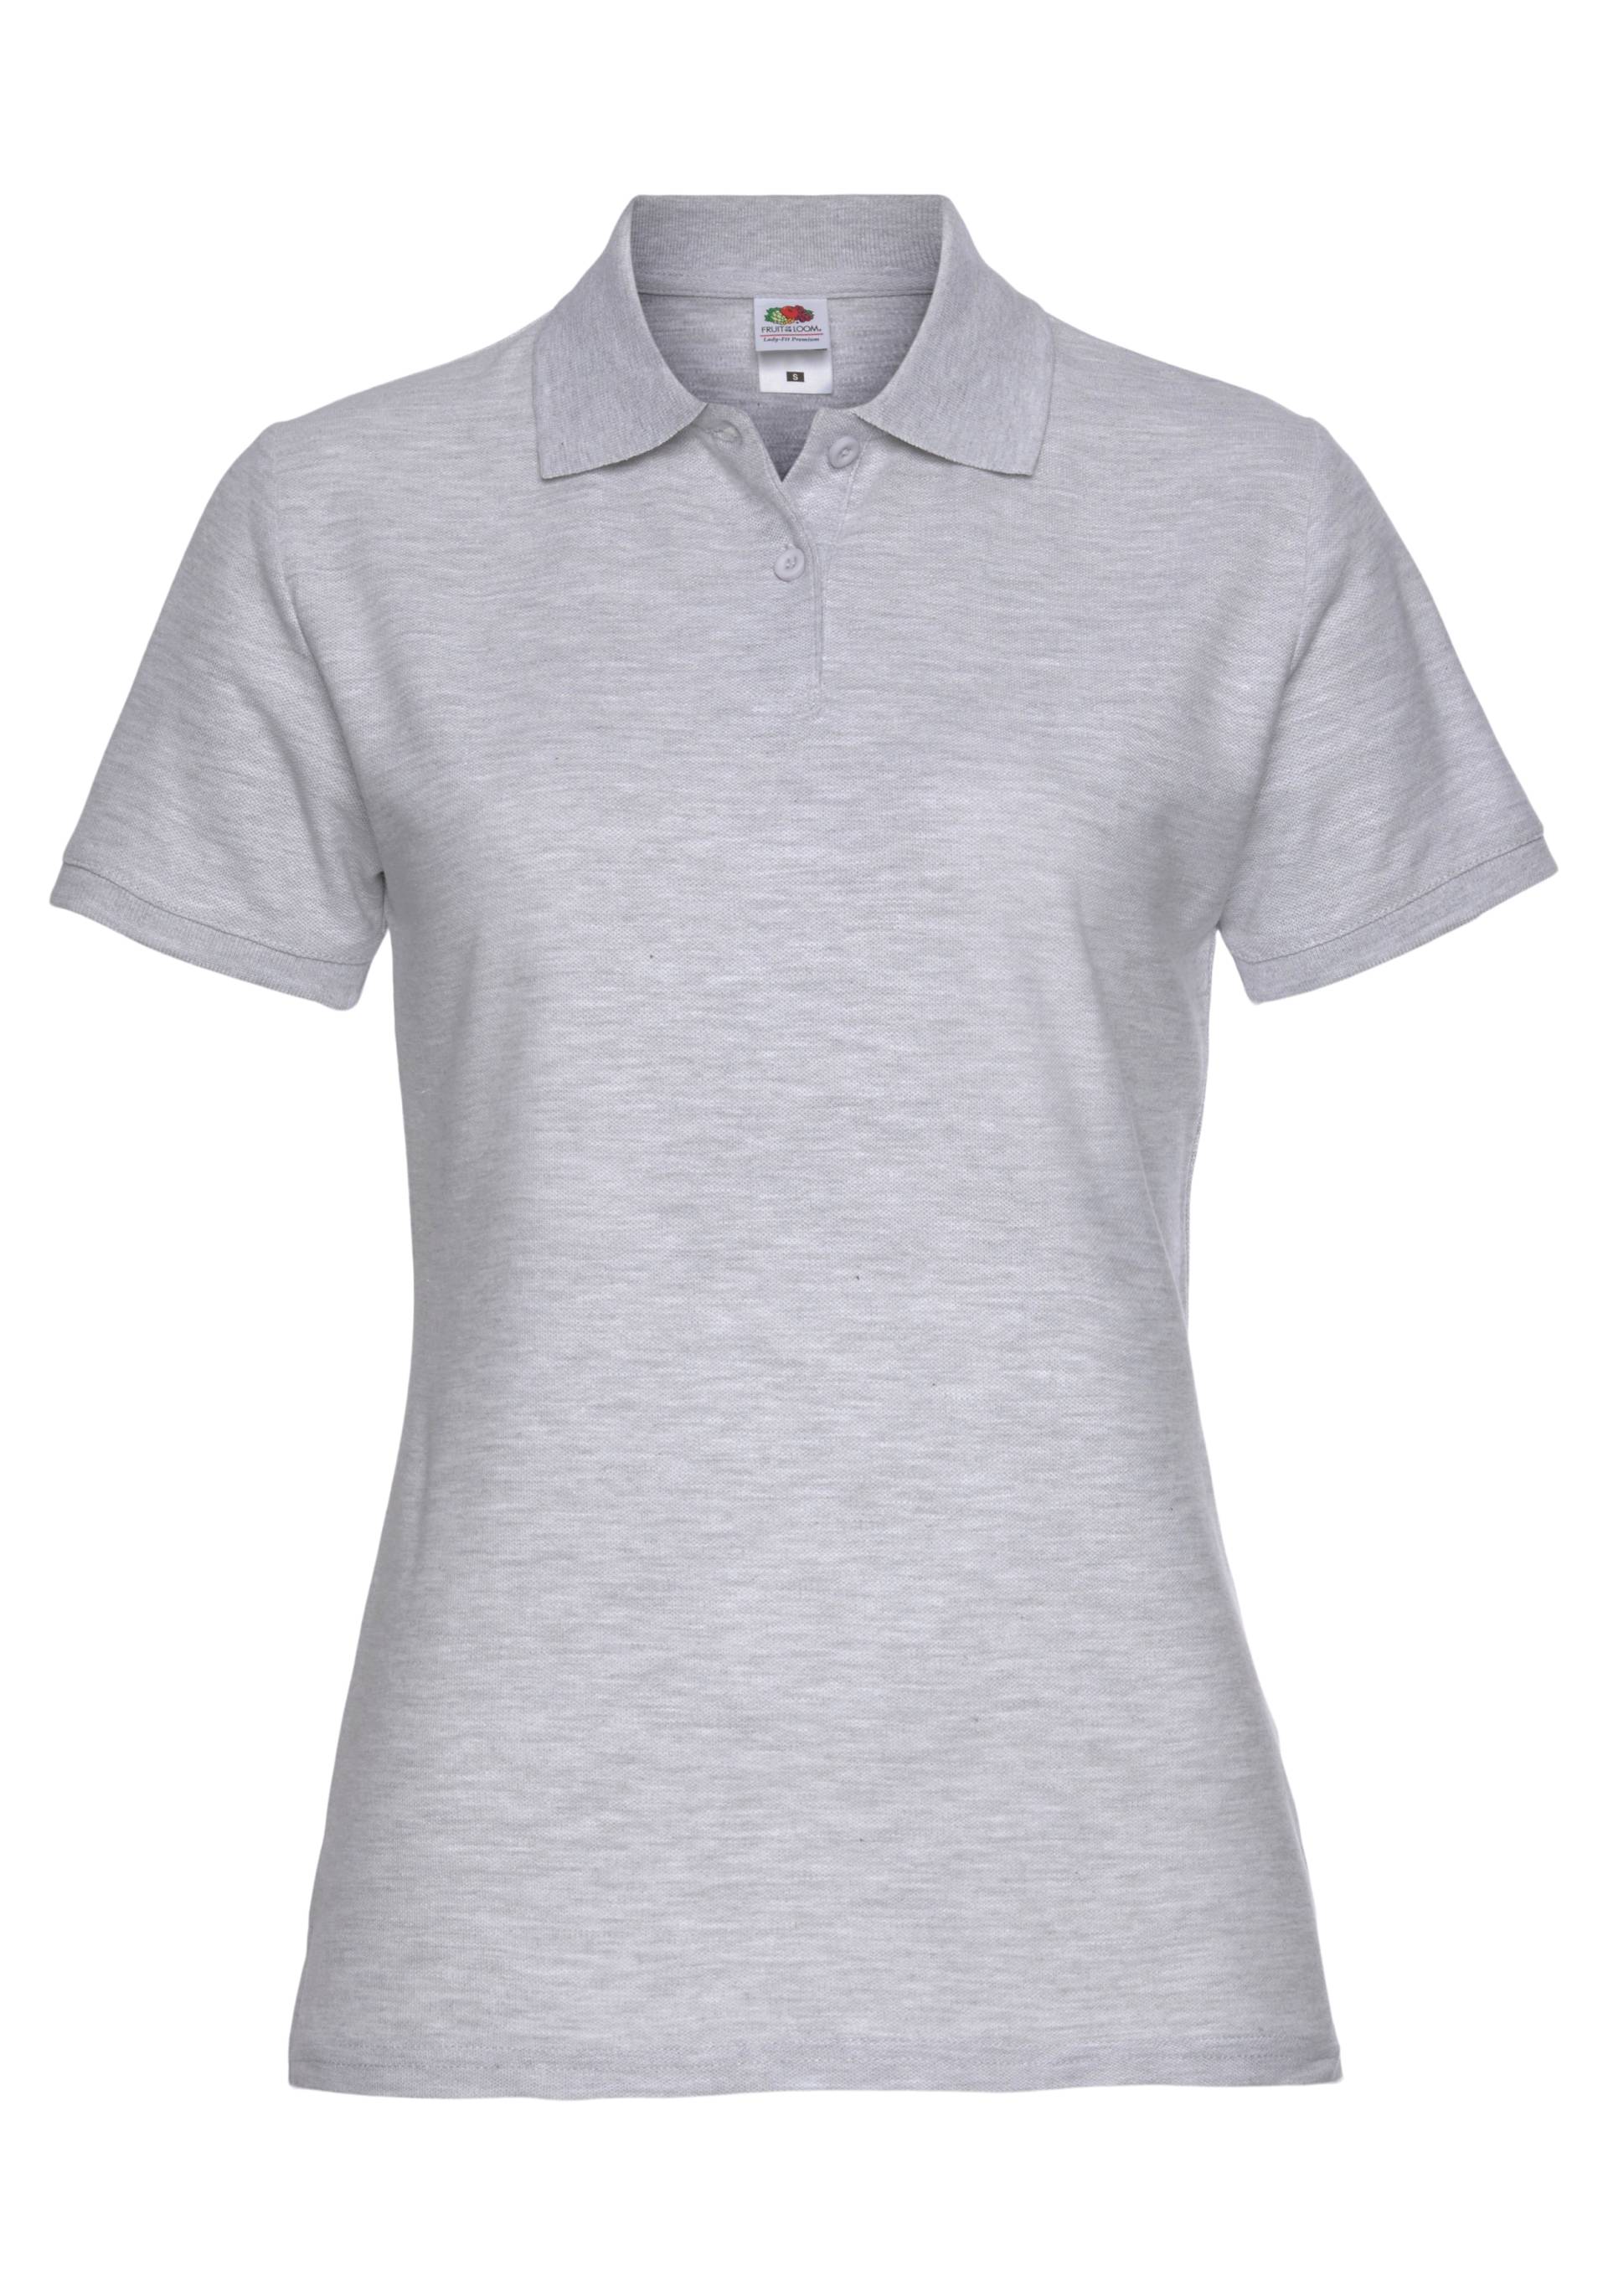 Fruit of the Loom Poloshirt »Lady-Fit Premium Polo« von Fruit of the Loom